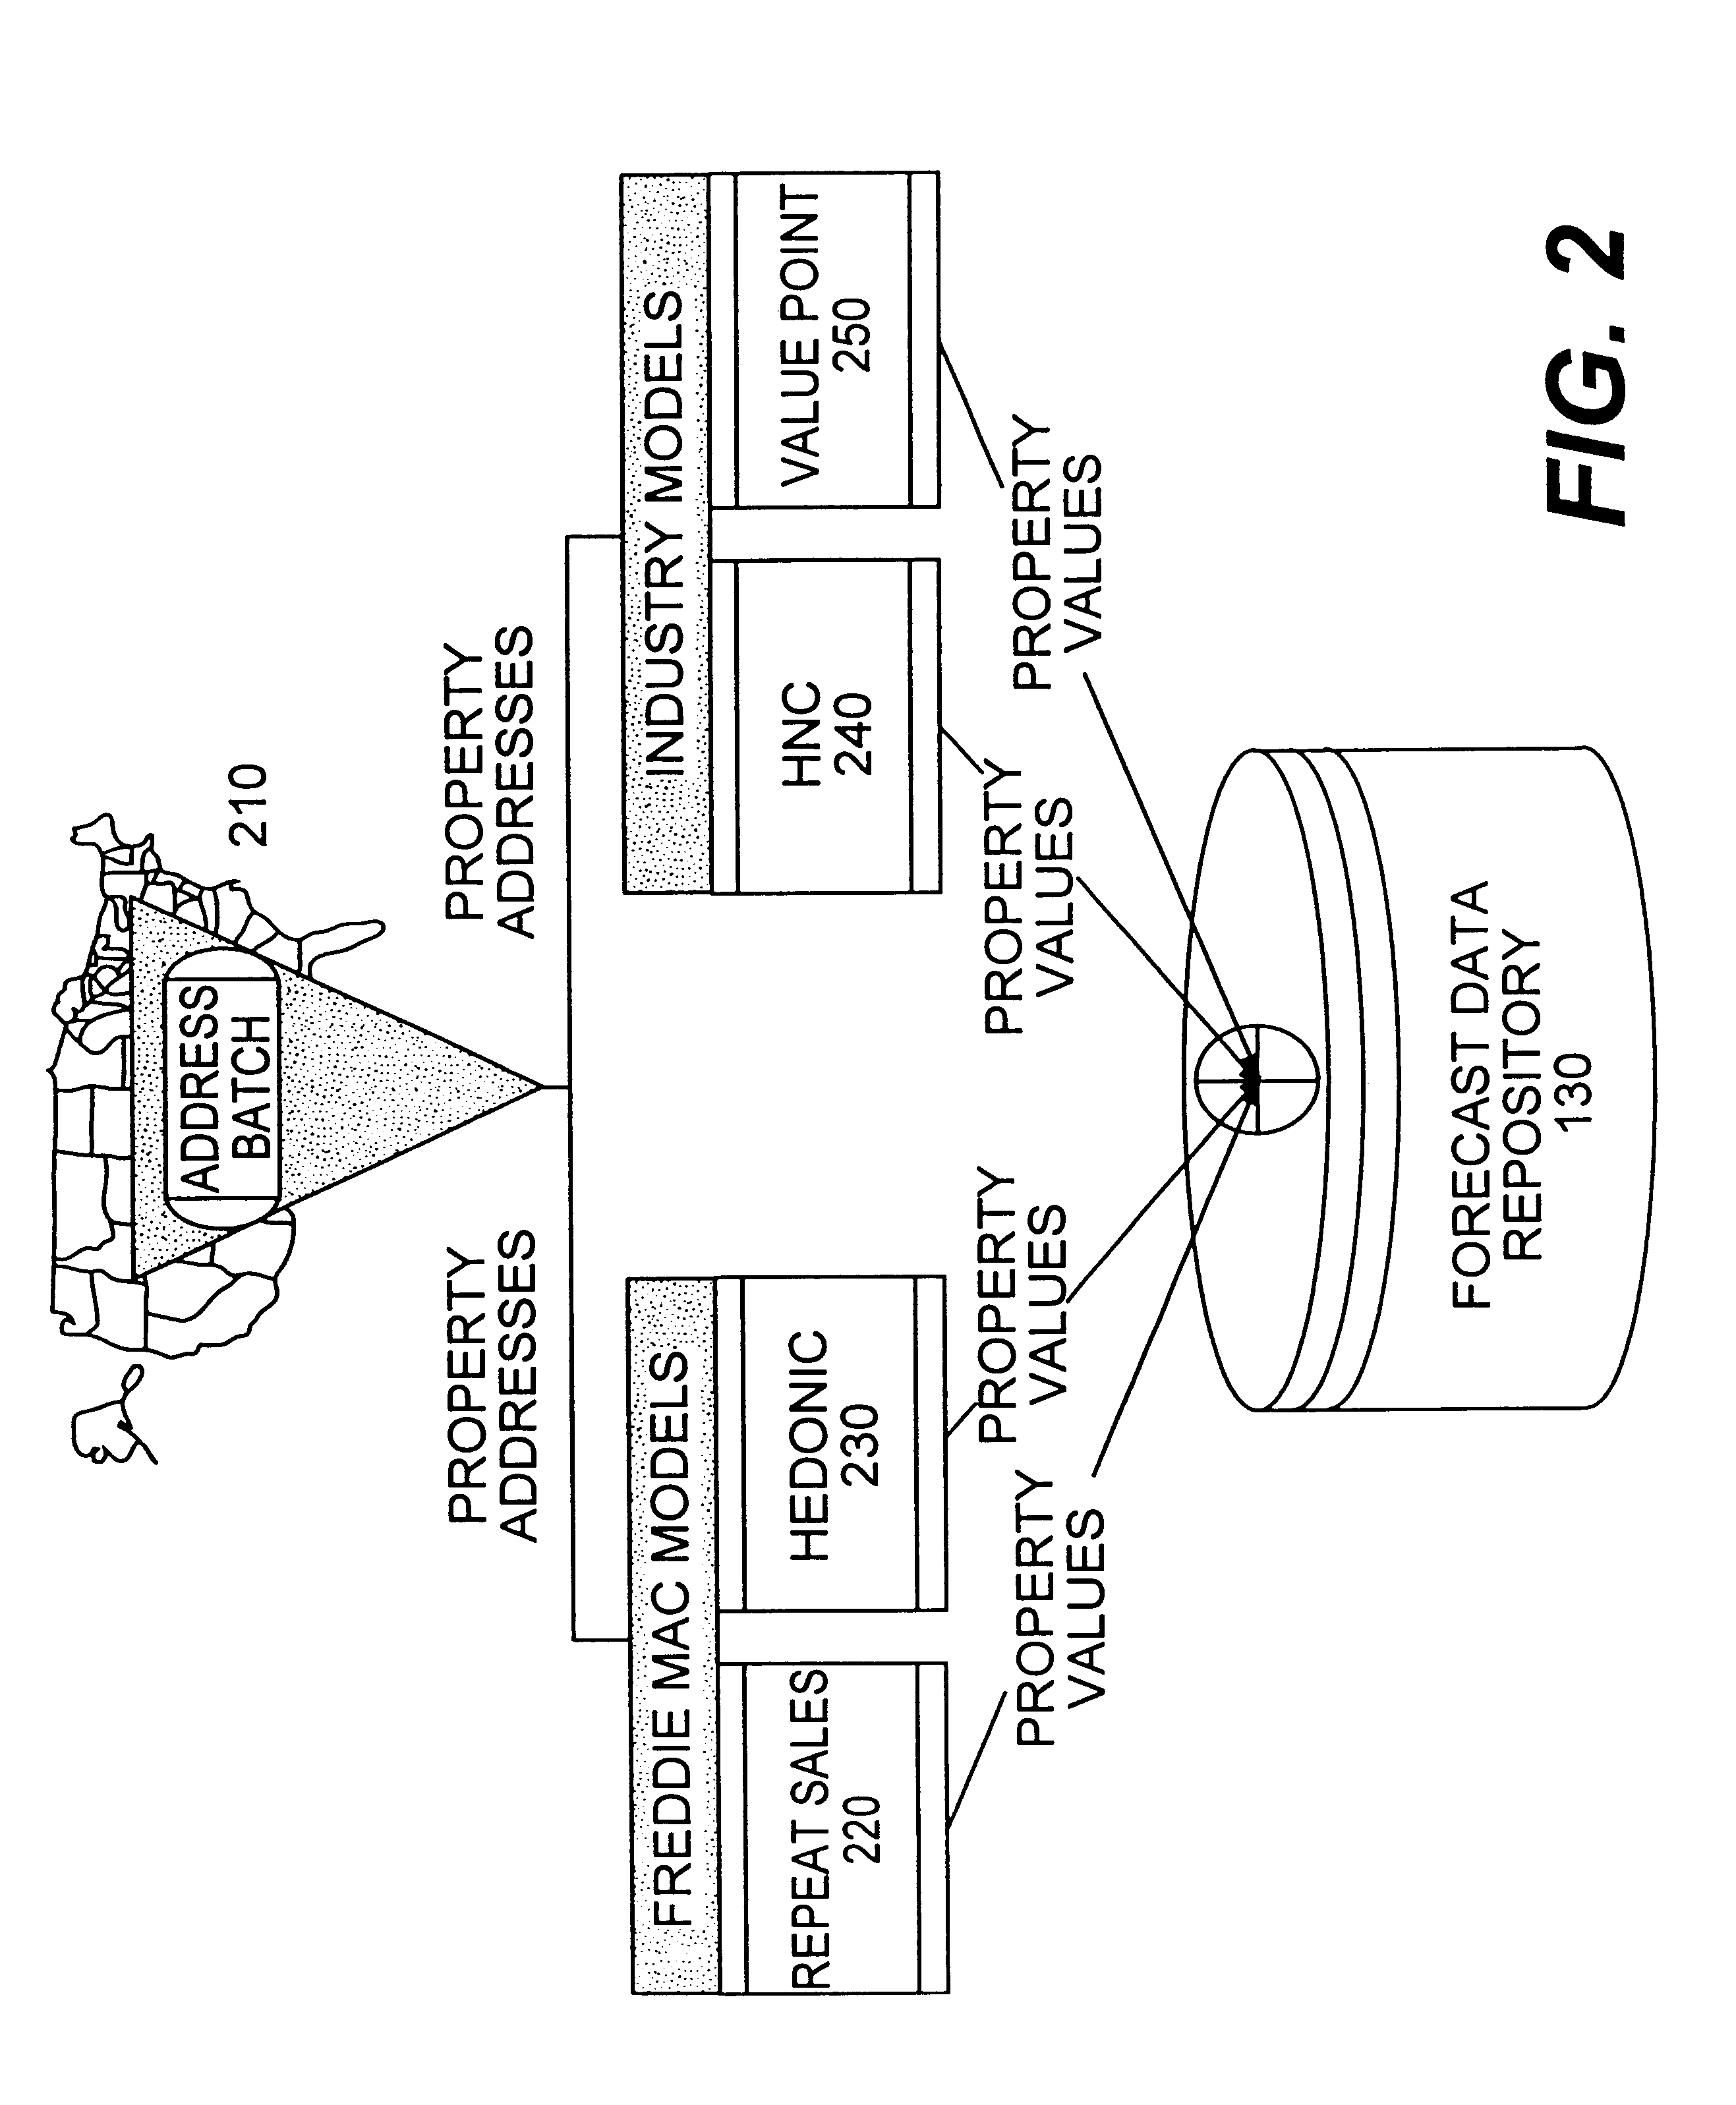 System and method for providing property value estimates